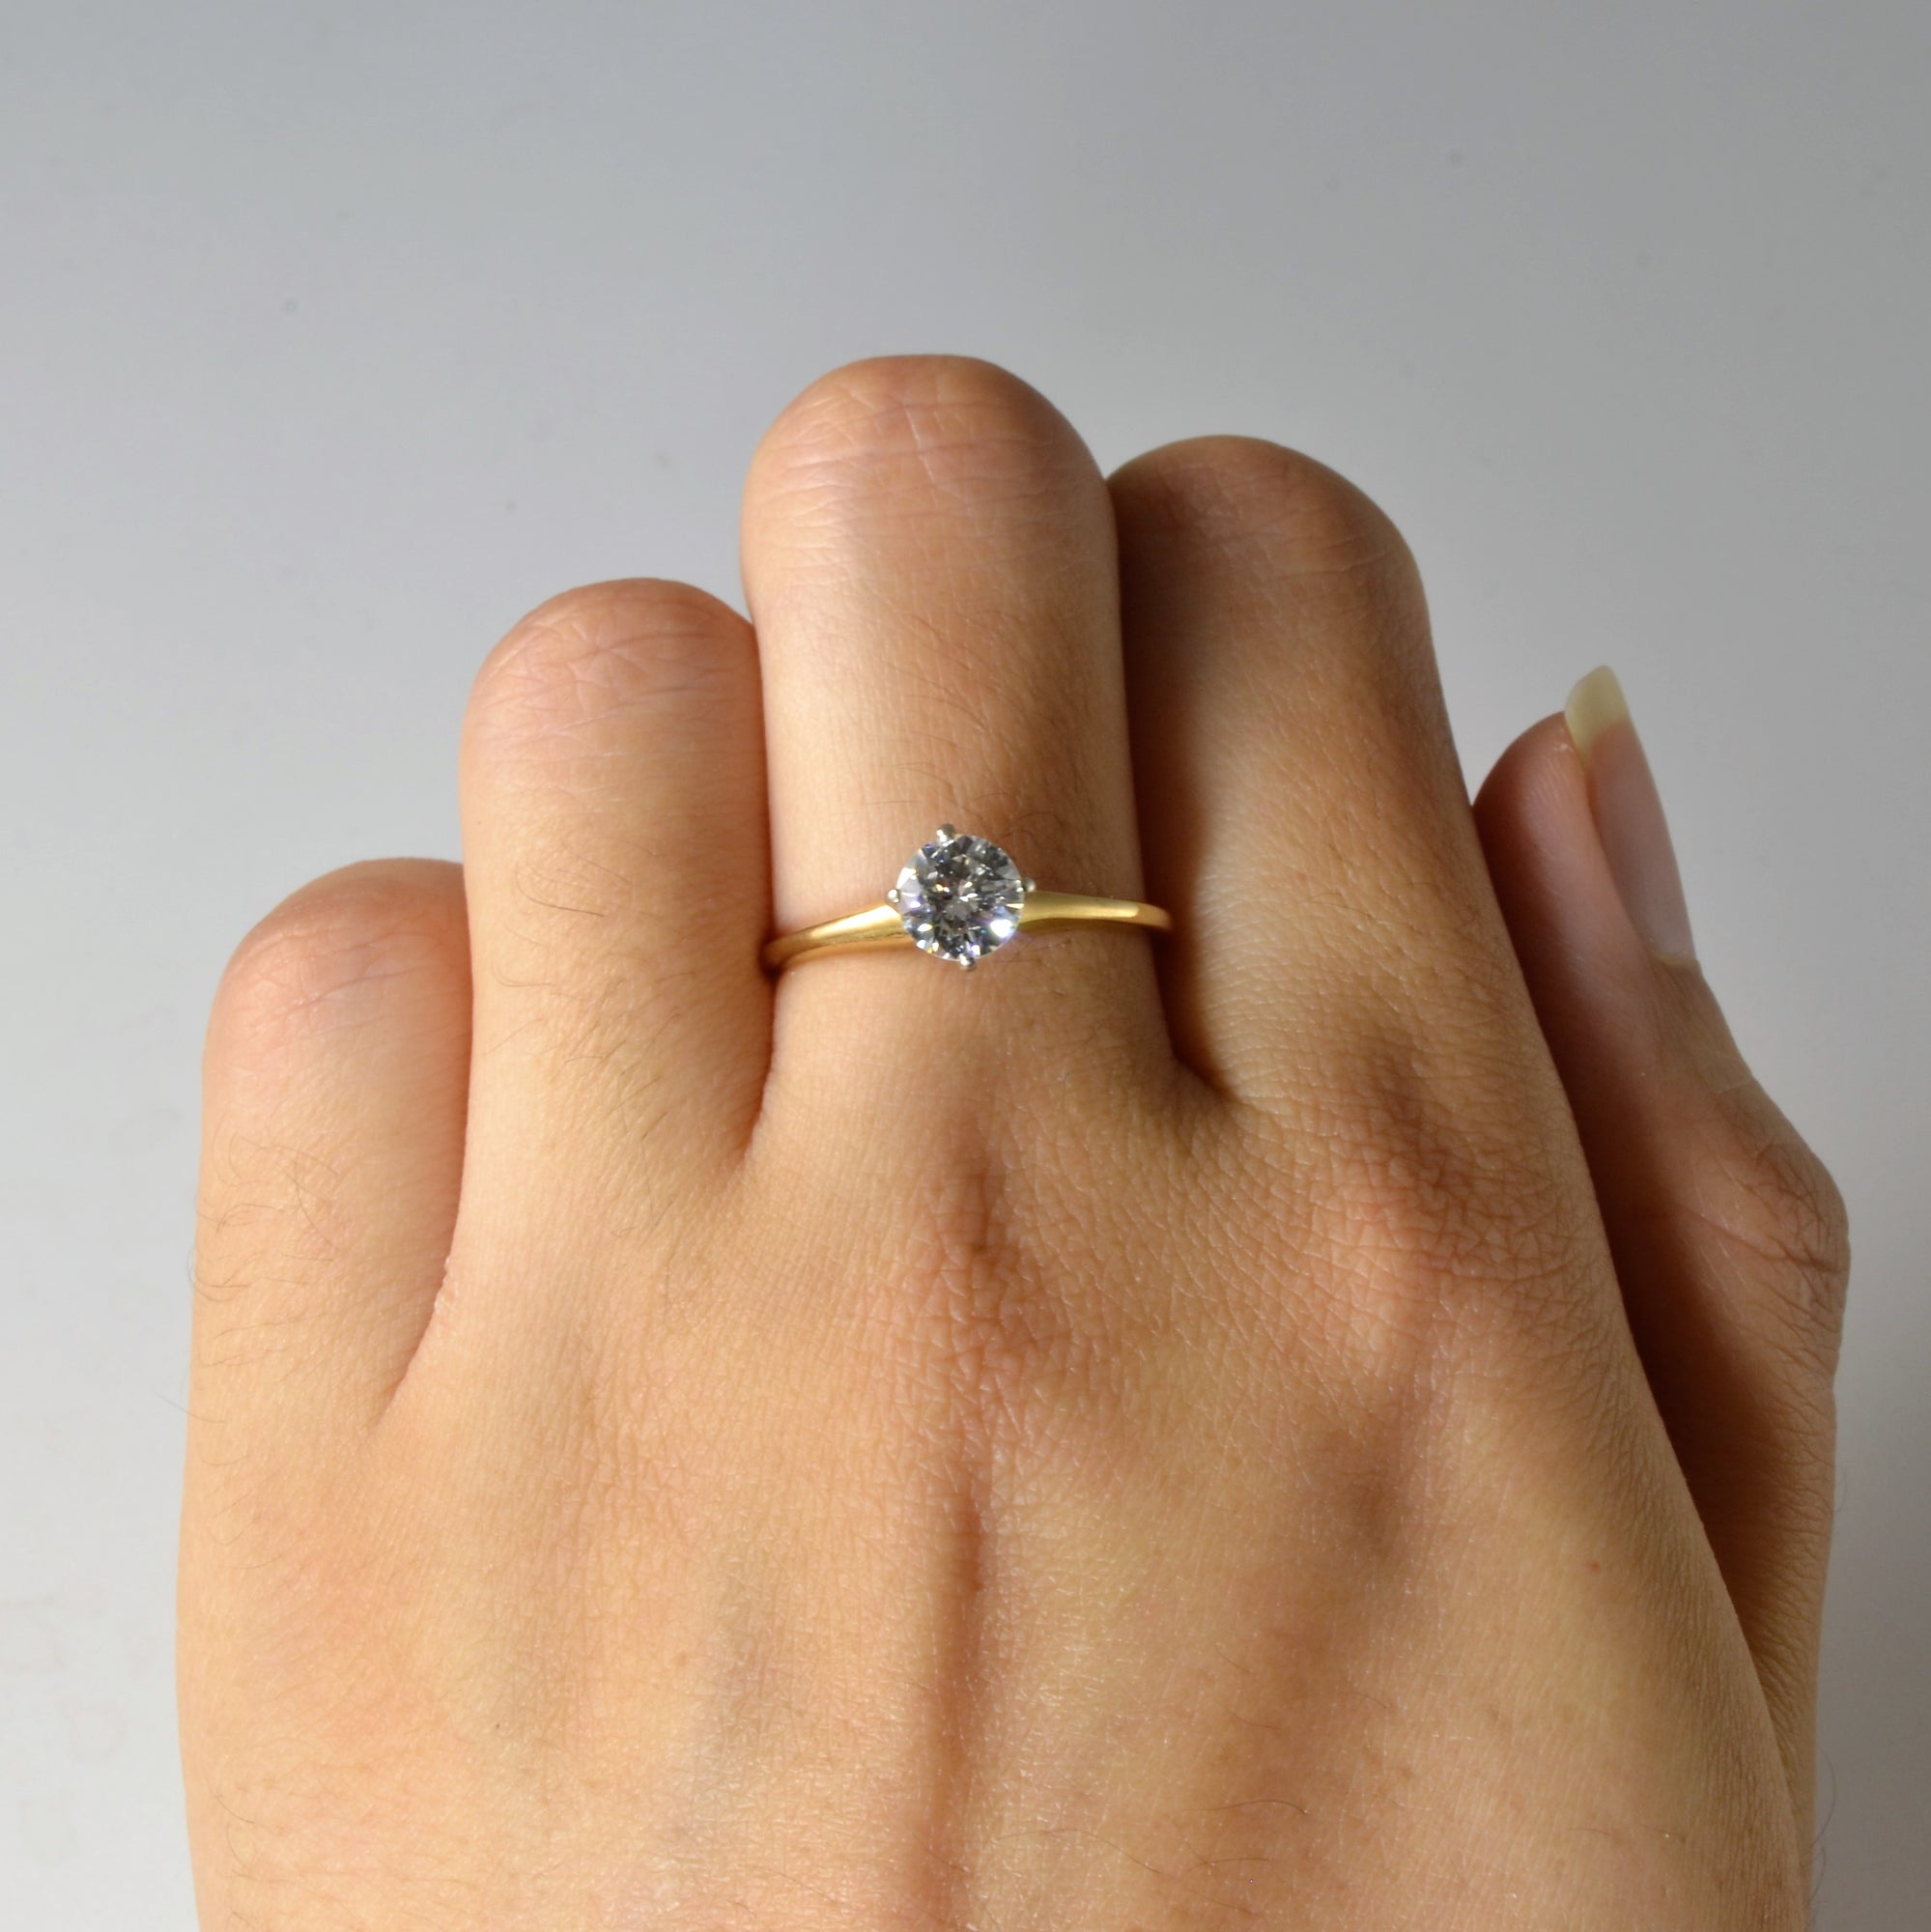 Orange Blossom' Late 1930s Solitaire Engagement Ring | 0.69ct | SZ 7 |